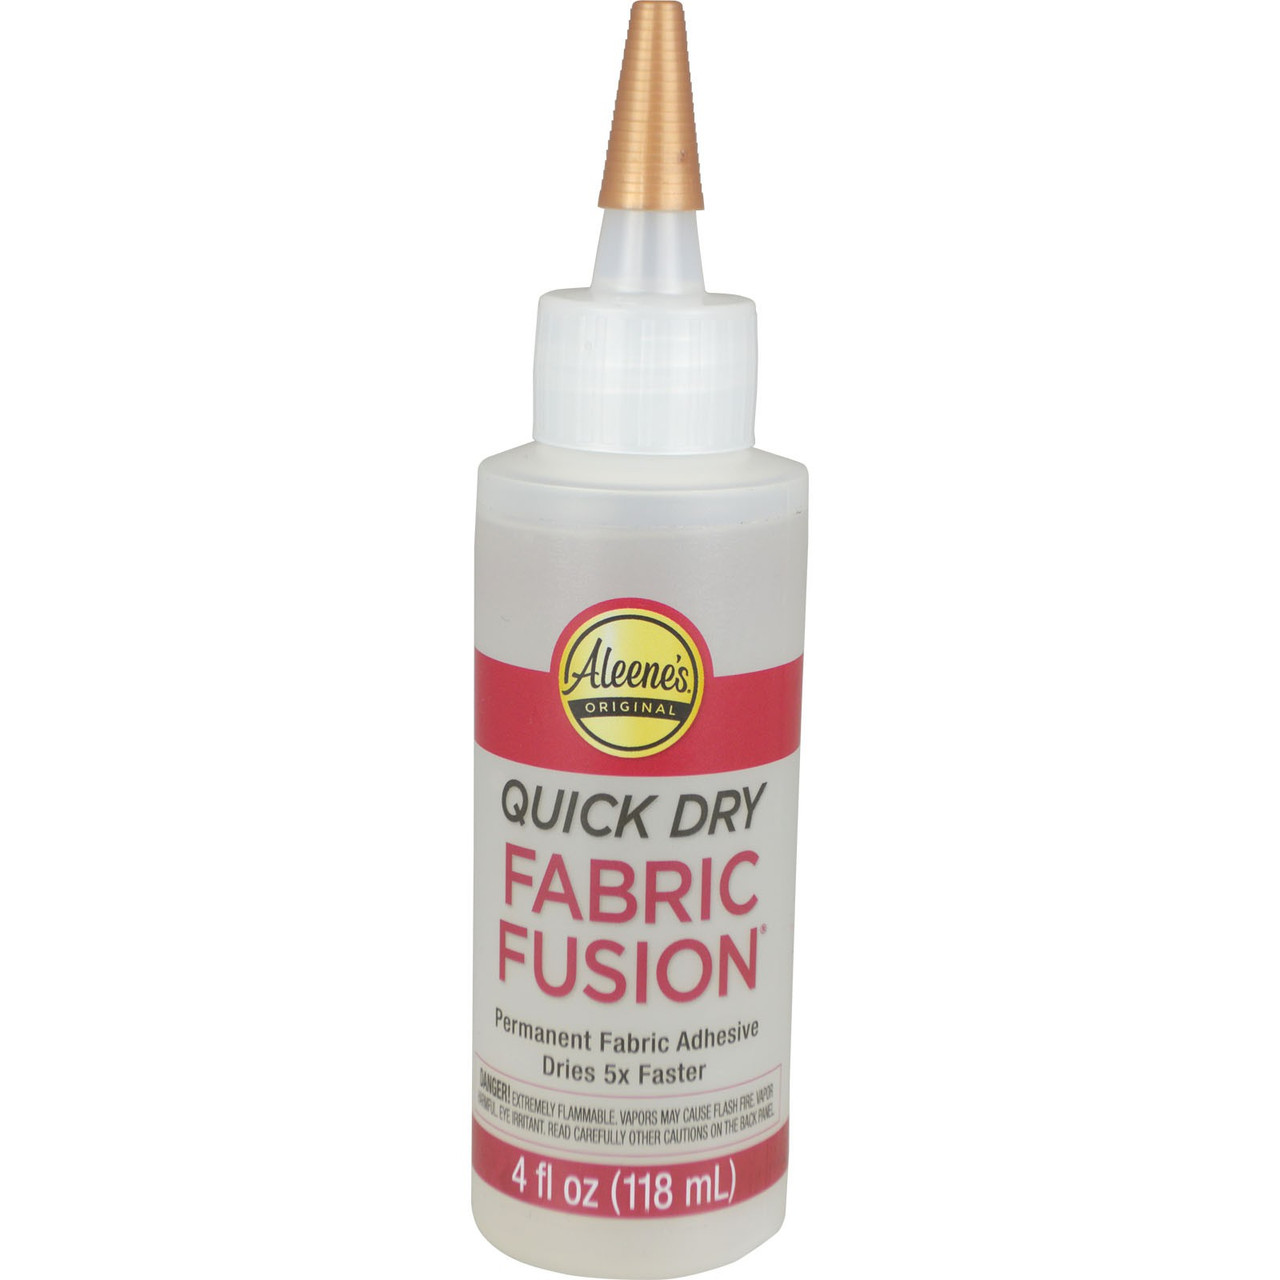 Quick Dry Fabric Fusion Adhesive 4 fl oz - The Sewing Place